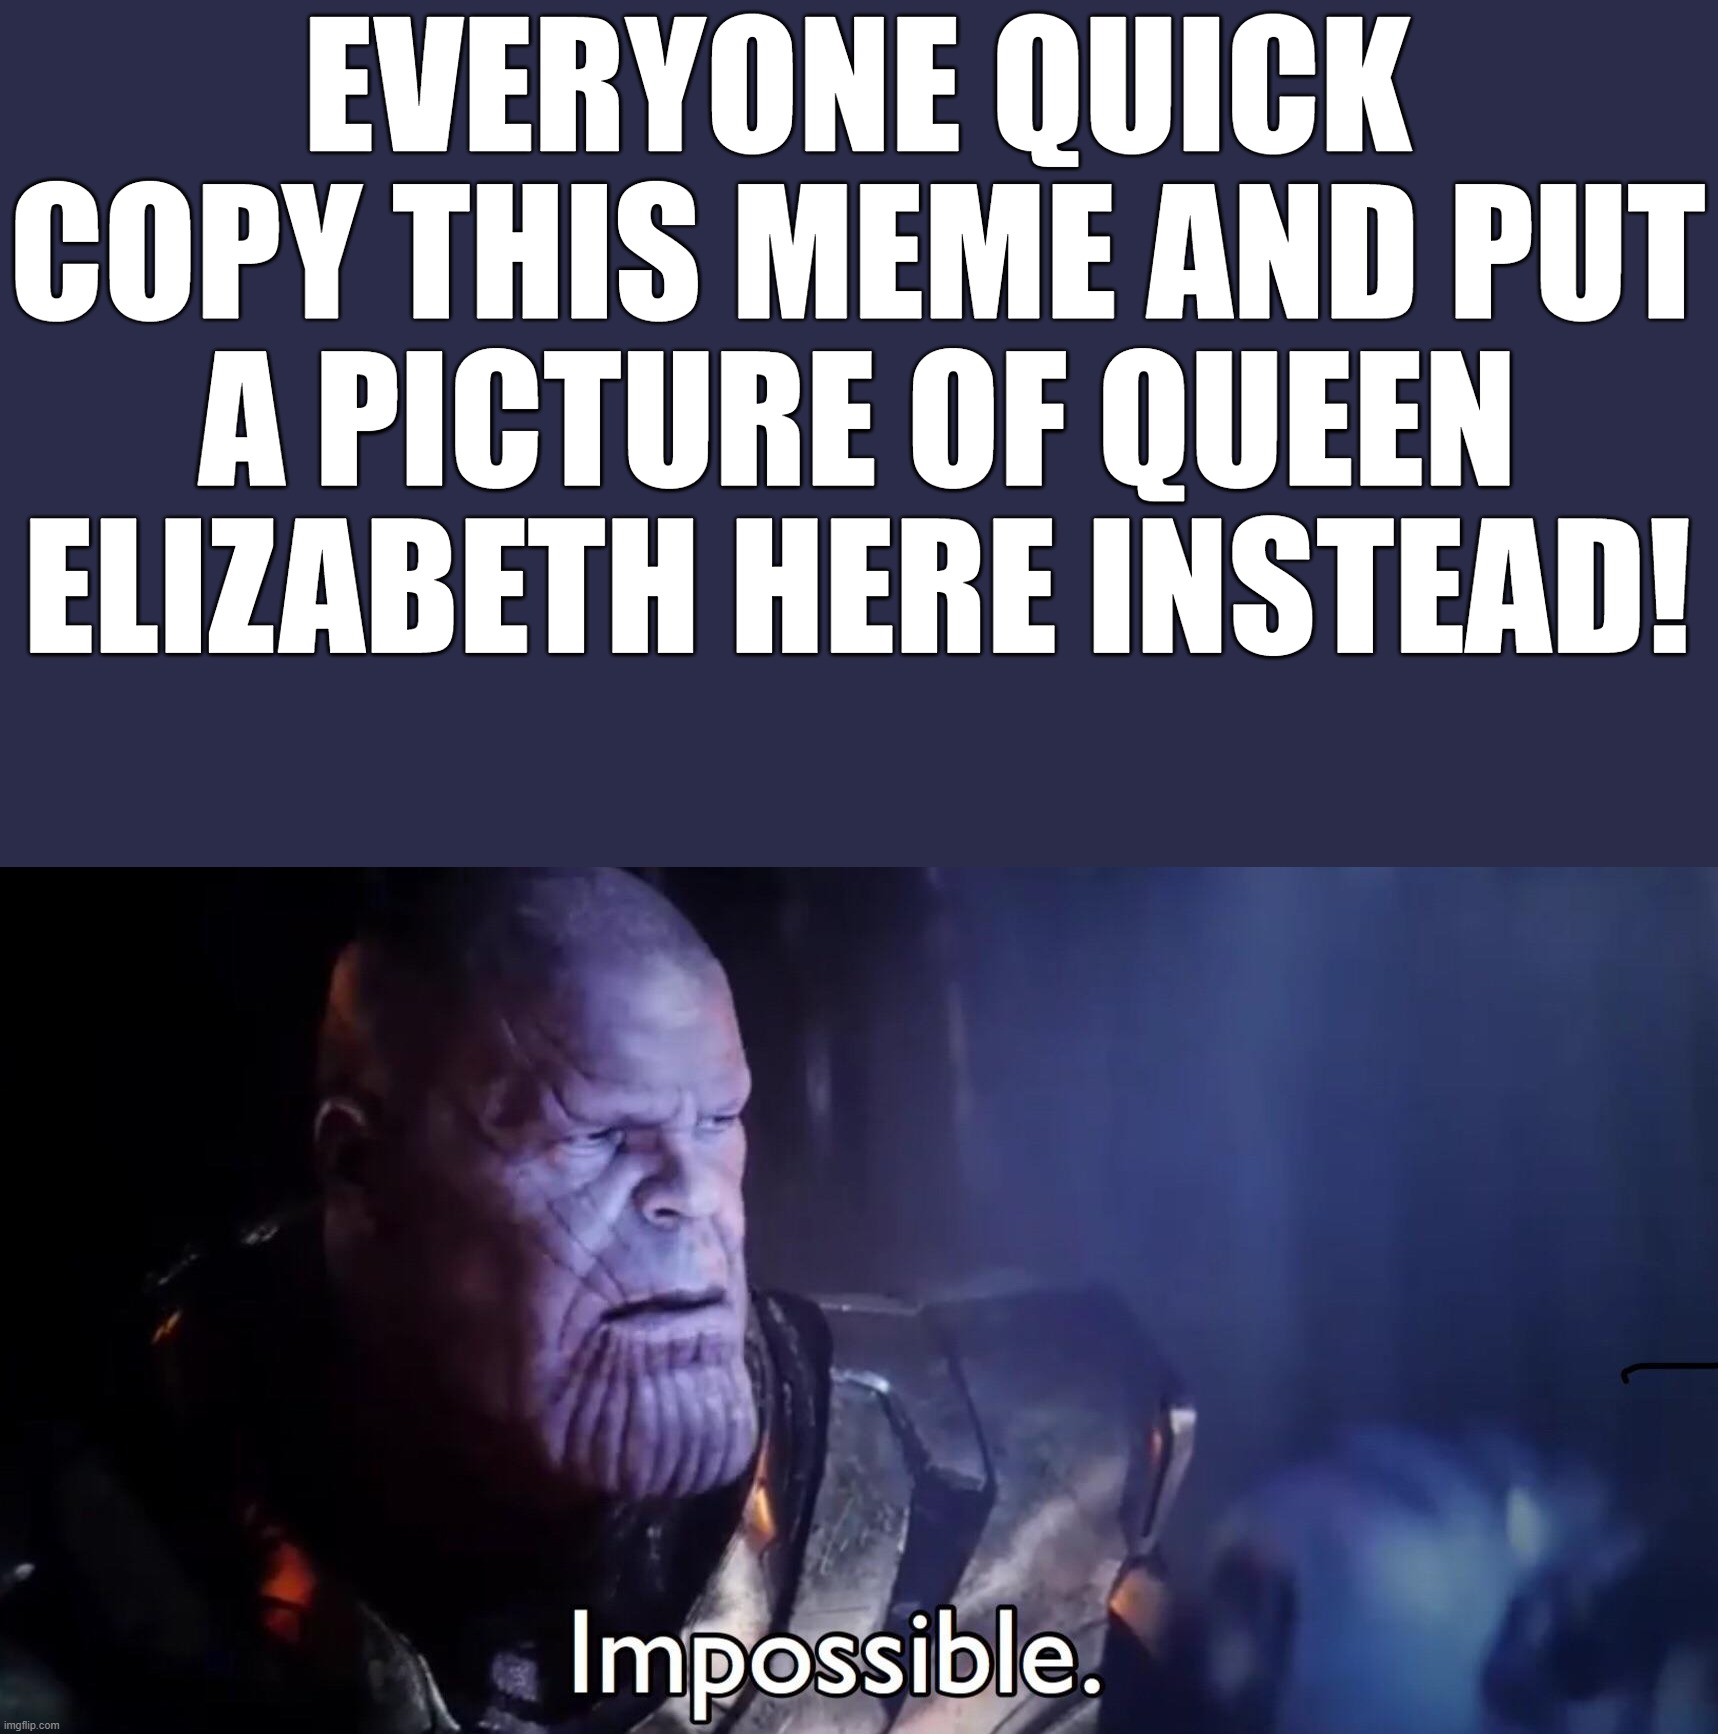 overused | EVERYONE QUICK COPY THIS MEME AND PUT A PICTURE OF QUEEN ELIZABETH HERE INSTEAD! | image tagged in thanos impossible | made w/ Imgflip meme maker